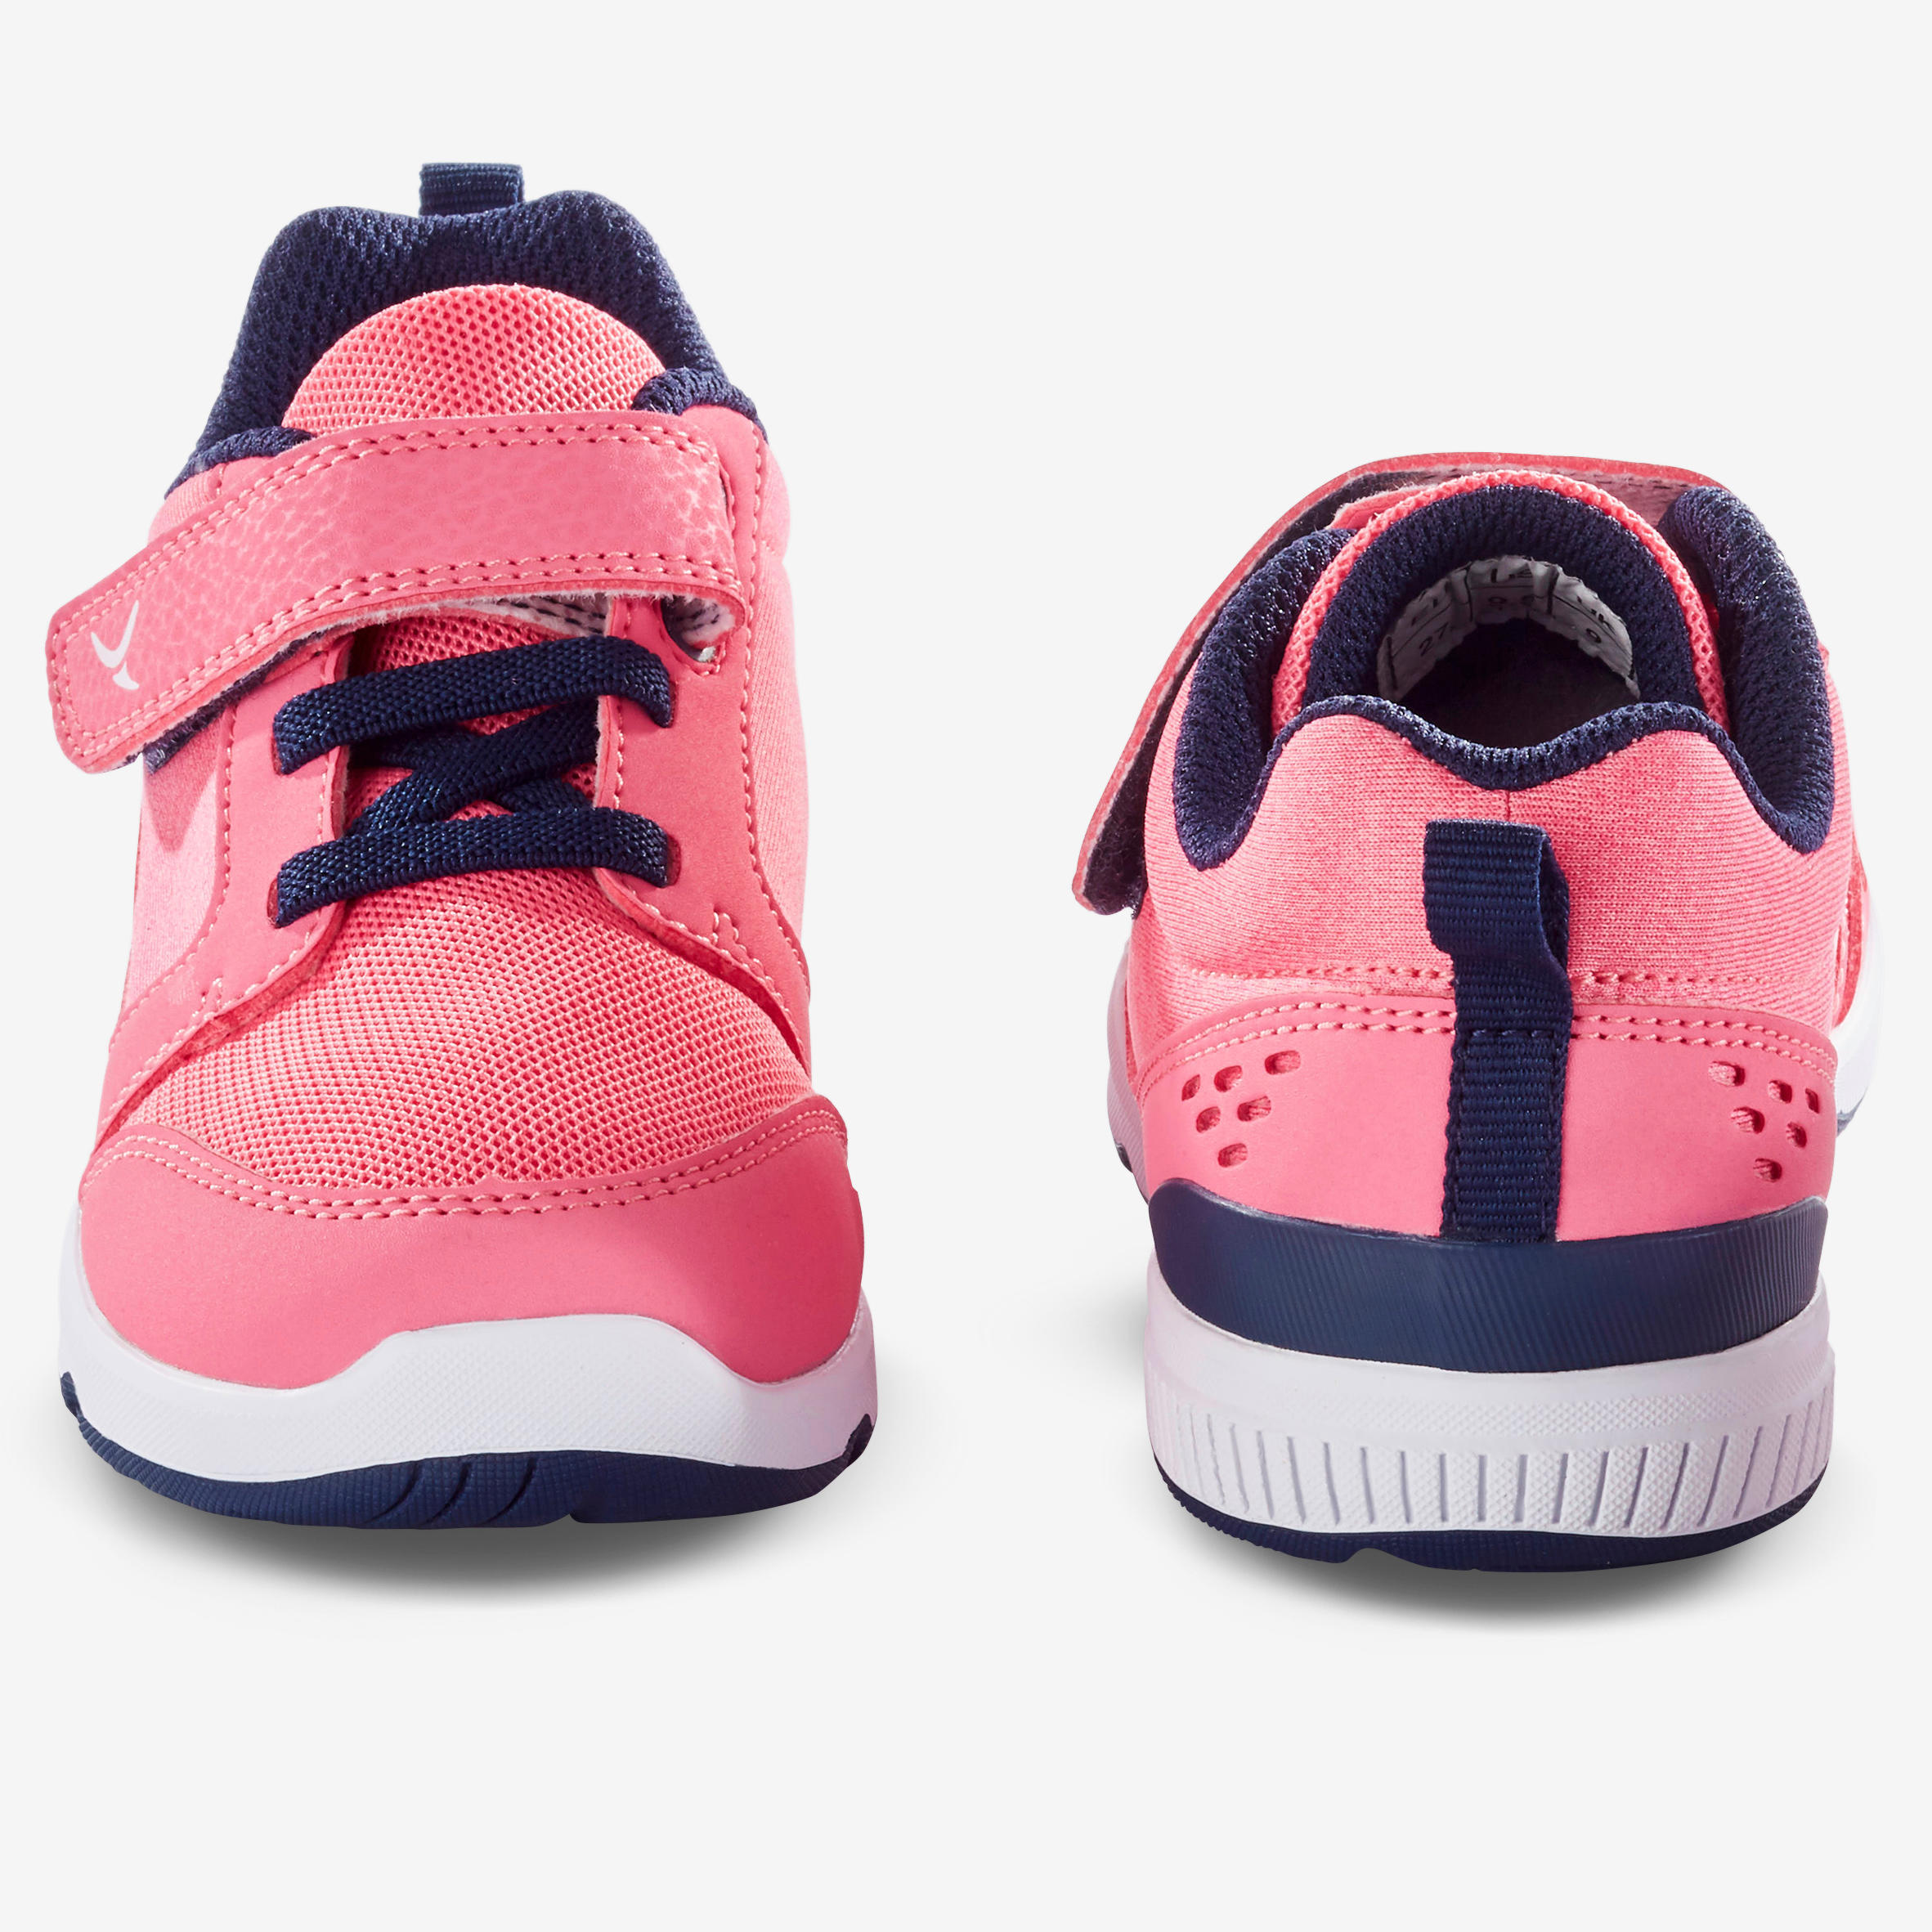 Kids' Comfortable and Breathable Shoes 3/8